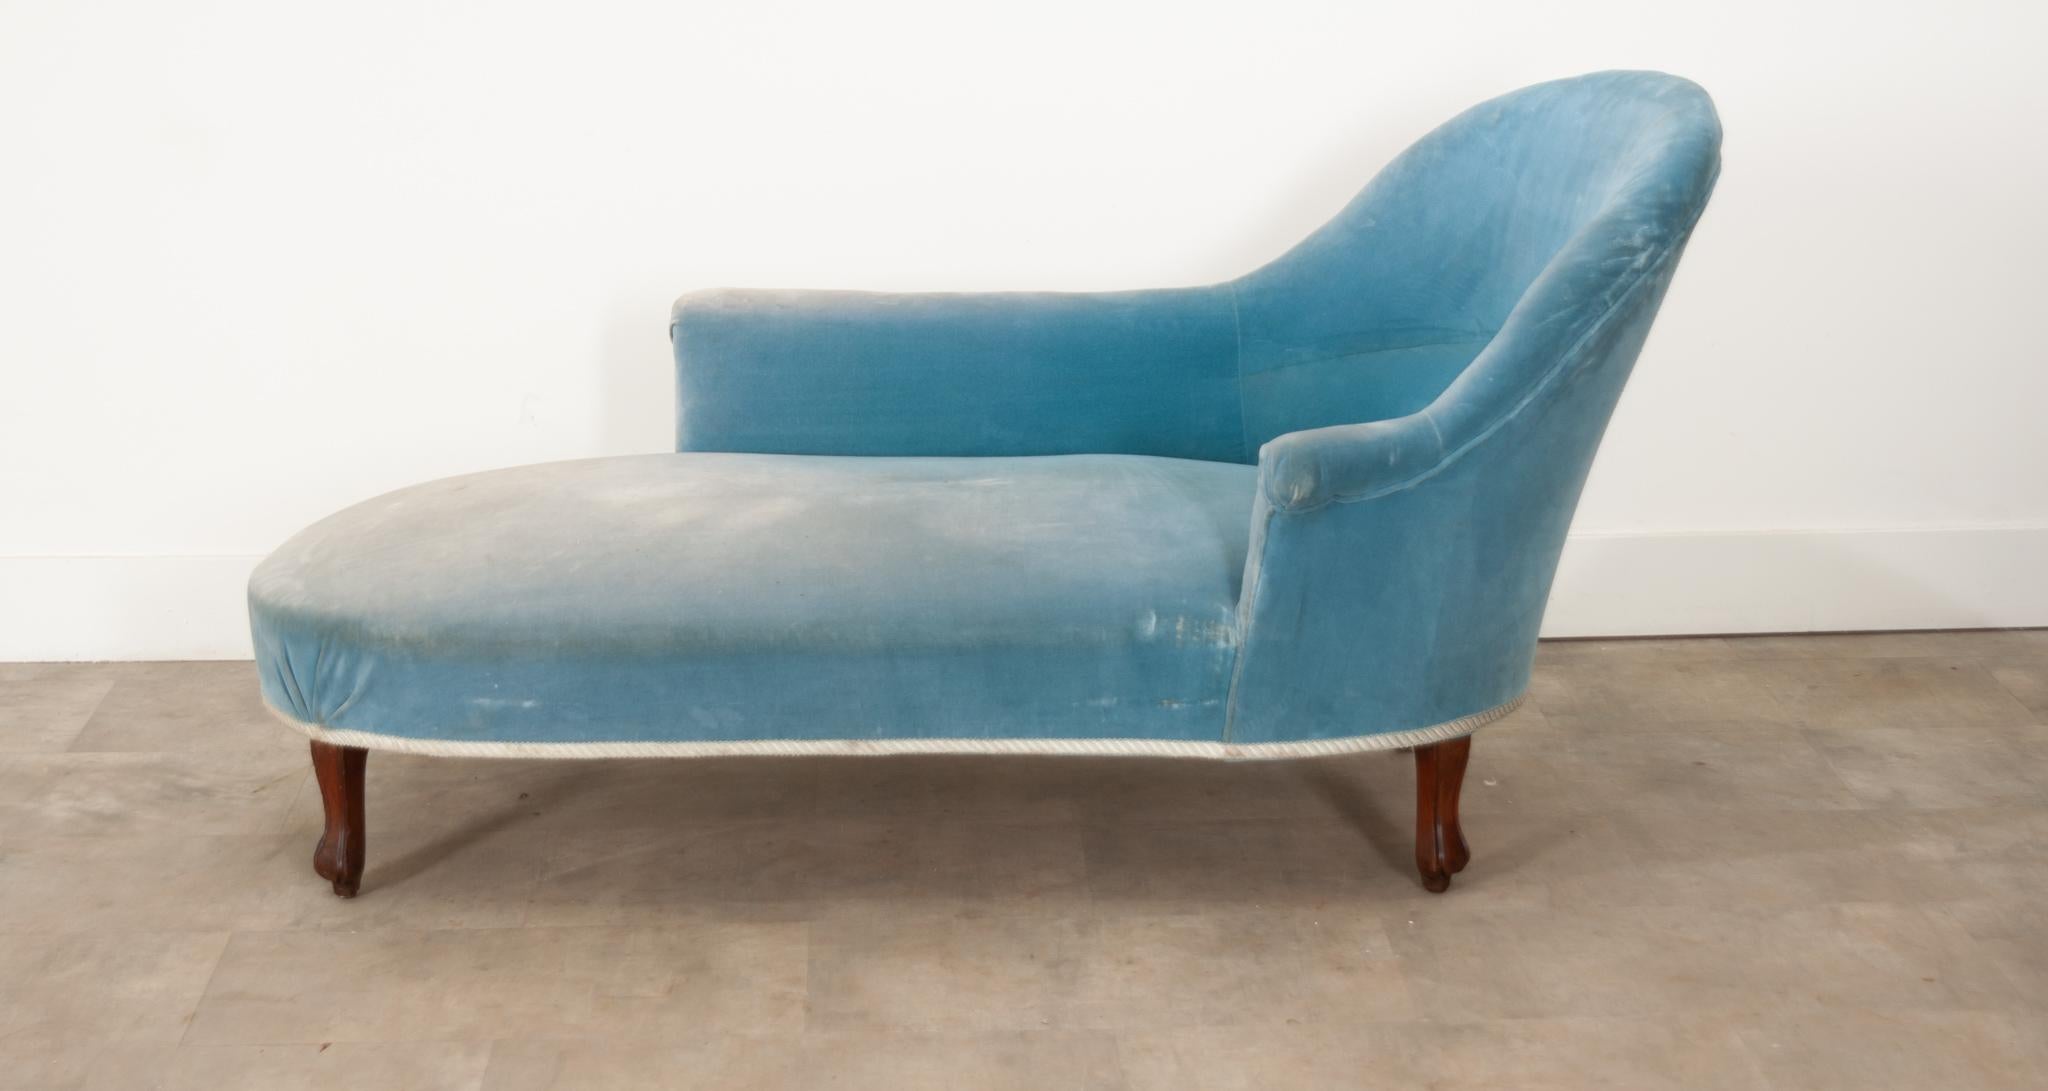 Hand-Crafted French Vintage Meridienne or Chaise Longue